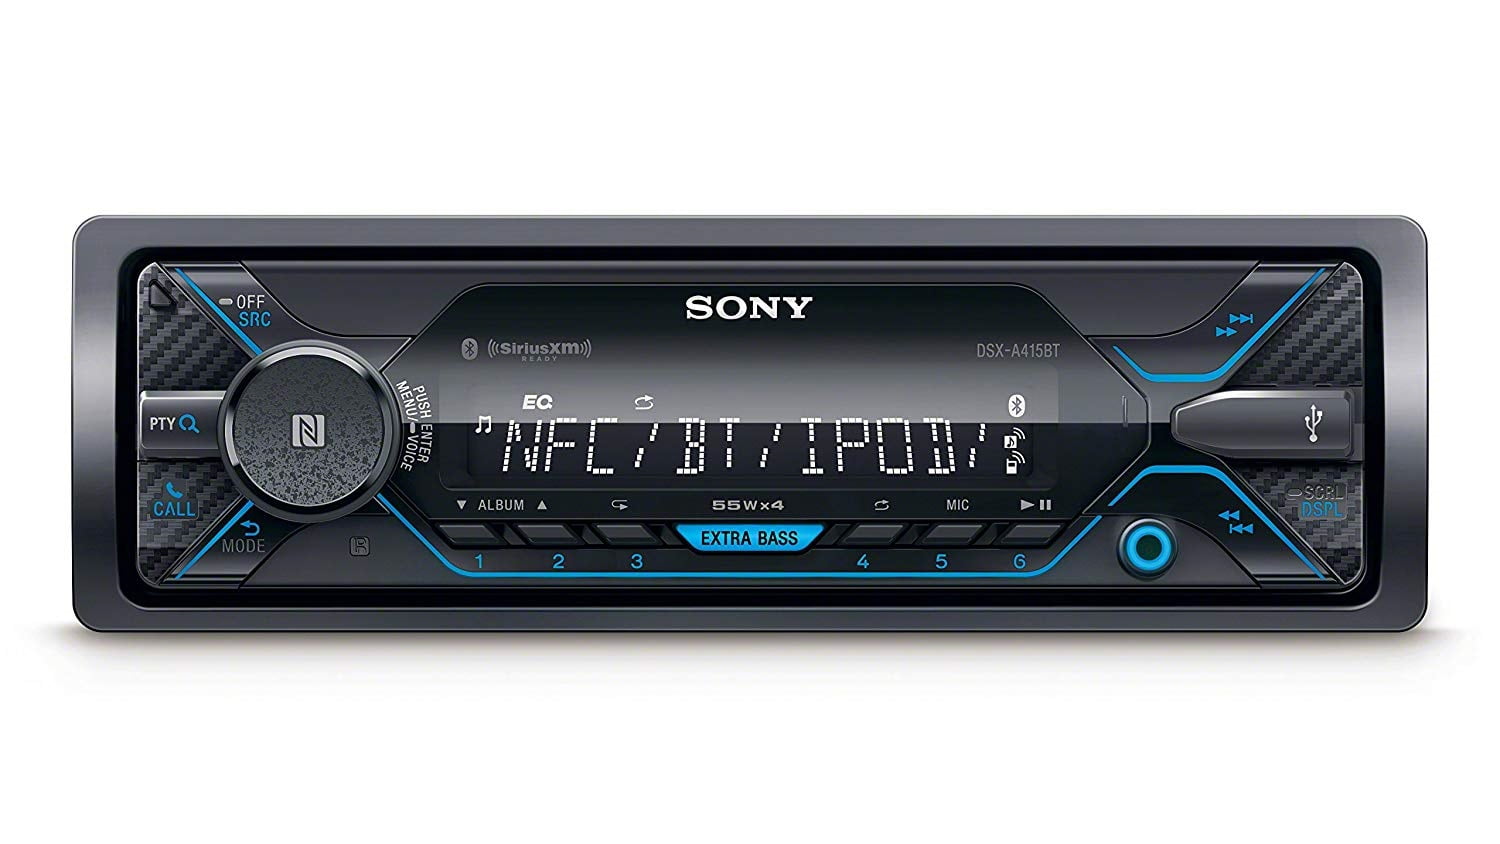 Sony DSX-A415BT Single DIN Bluetooth In-Dash Digital Media Car Stereo  Receiver with Front 3.5 & USB Auxiliary Inputs